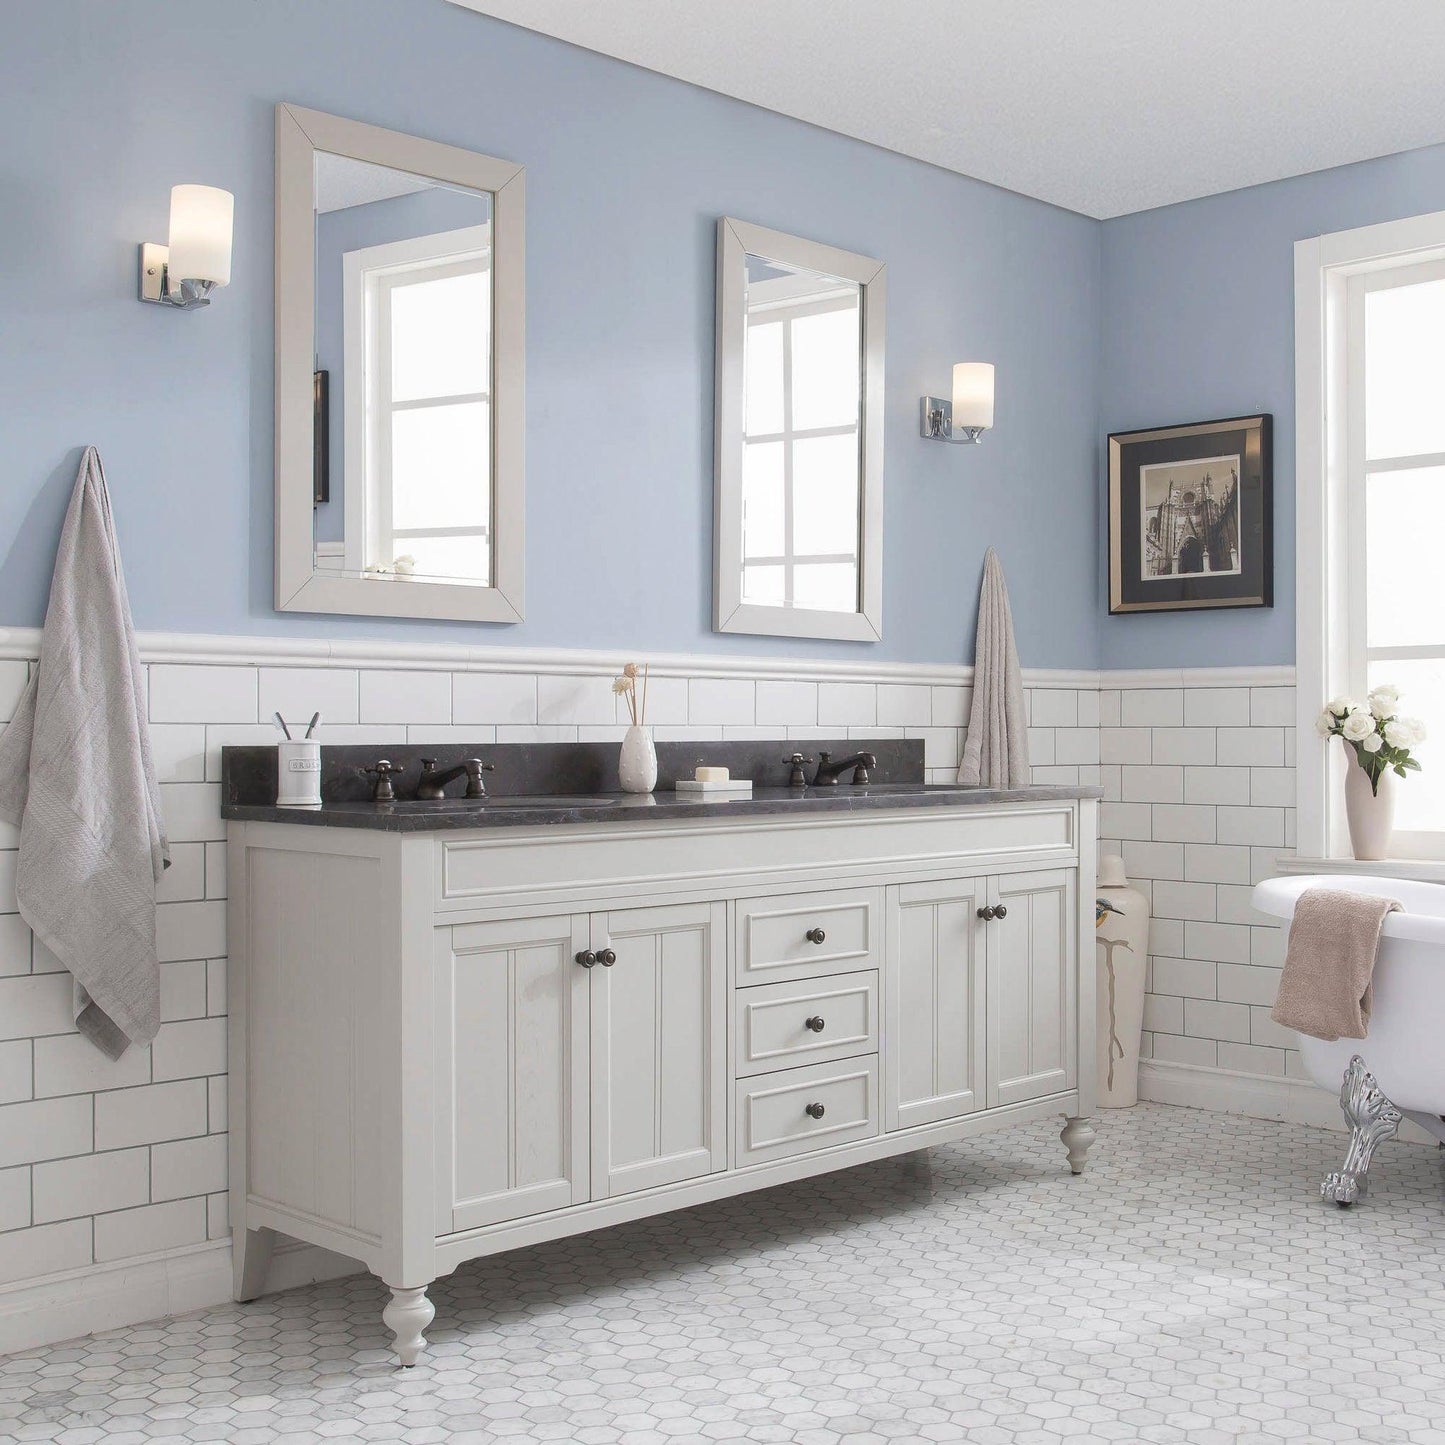 Water Creation Potenza 72" Bathroom Vanity in Earl Grey Finish with Blue Limestone Top with Faucet and Small Mirror